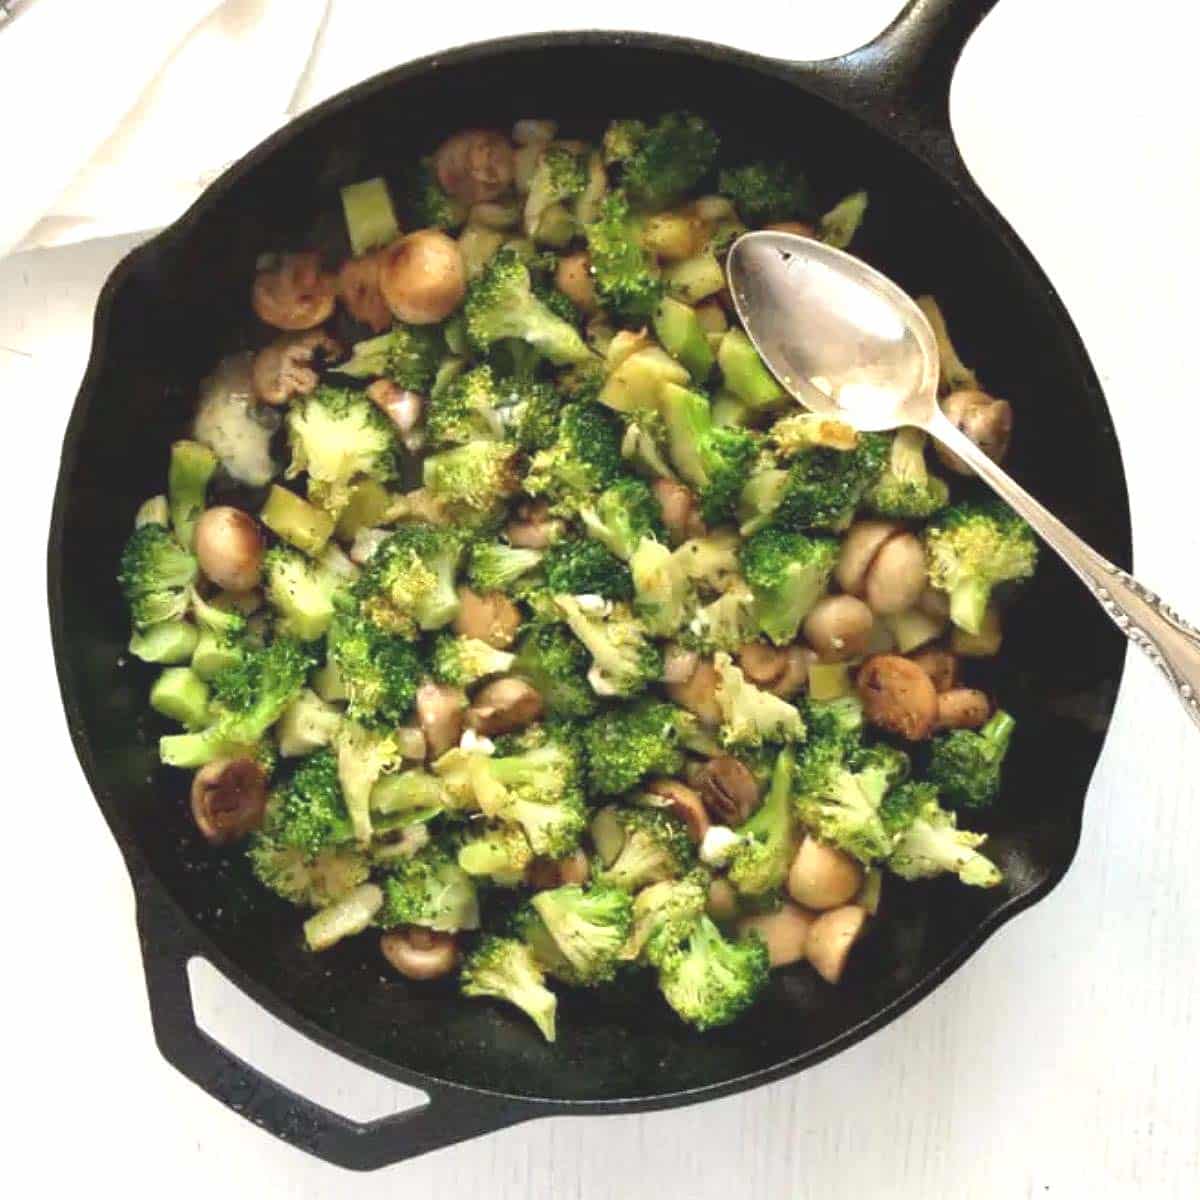 Broccoli and Mushrooms with Blue Cheese